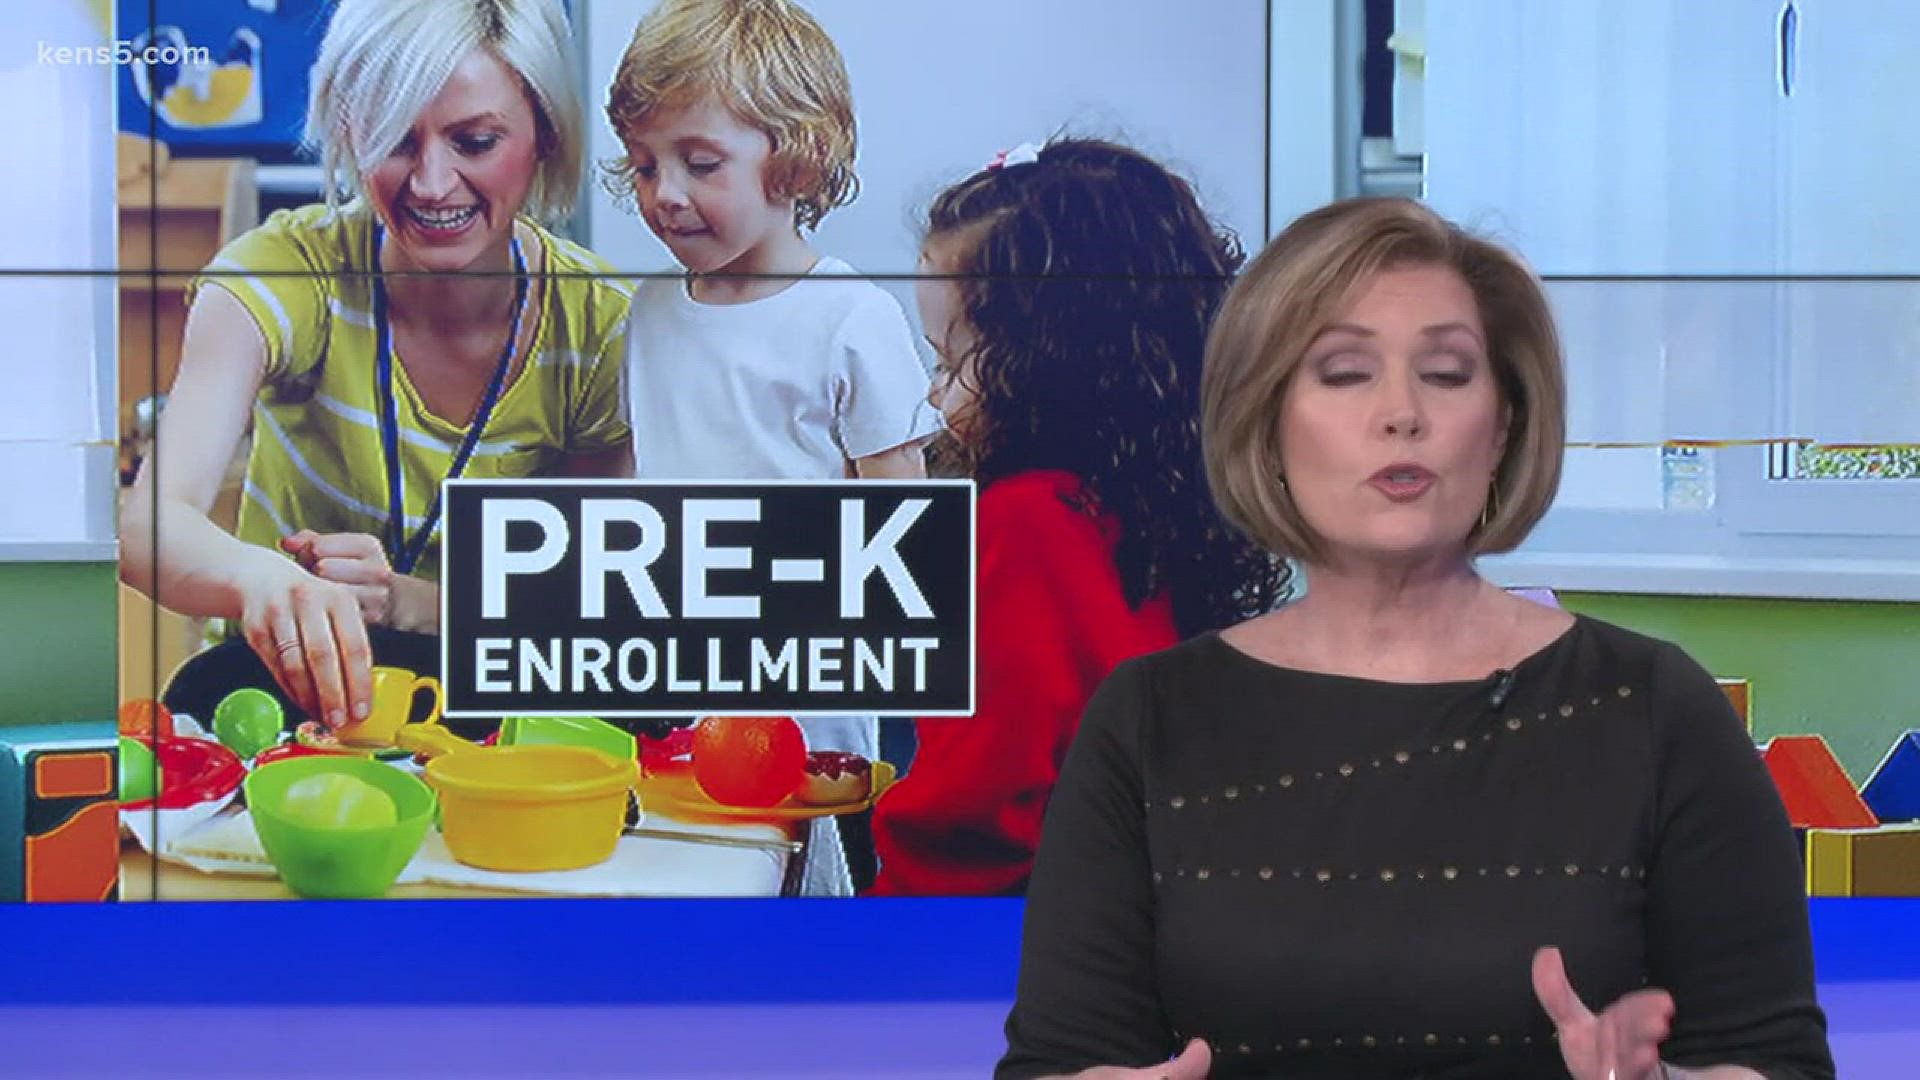 Parents can go to any one of four centers to sign their children up for Pre-K 4 SA. Kids can qualify for free education or tuition can be paid on a sliding scale based on income.